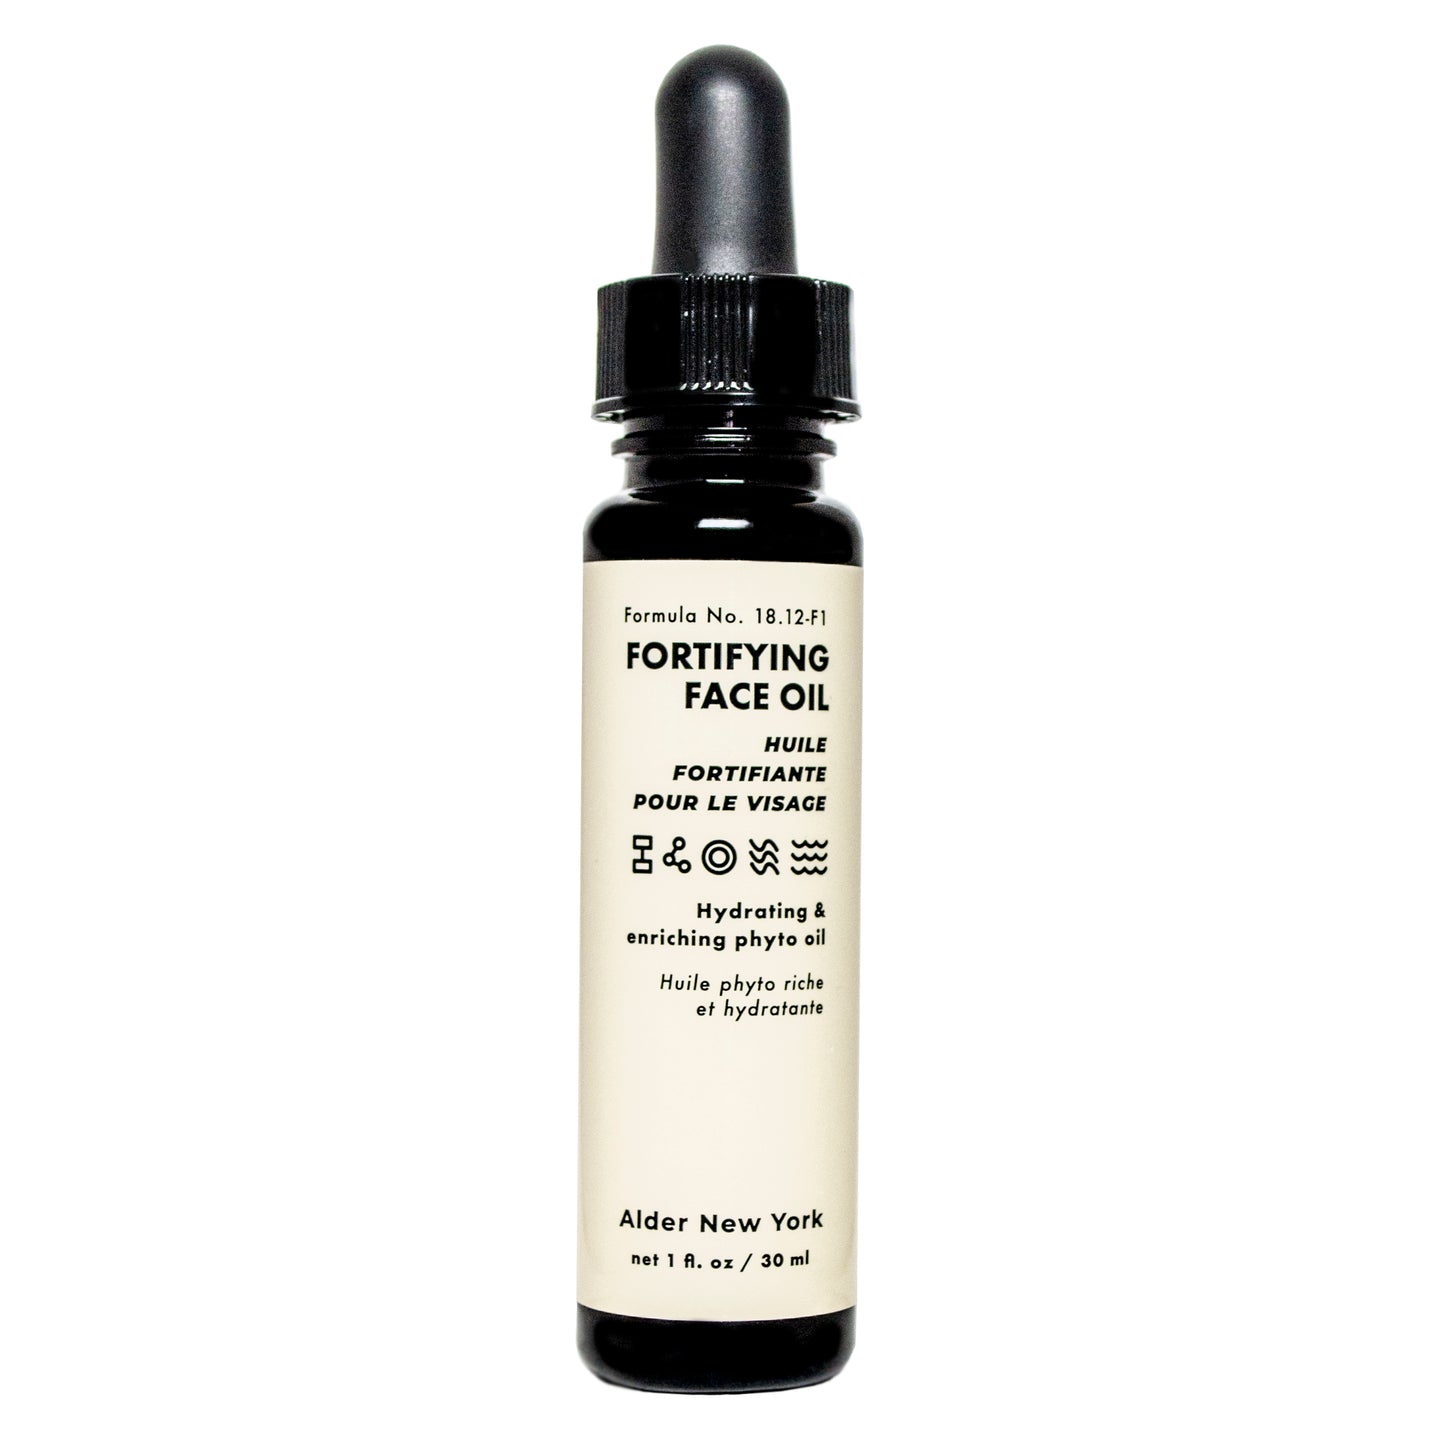 FORTIFYING FACE OIL